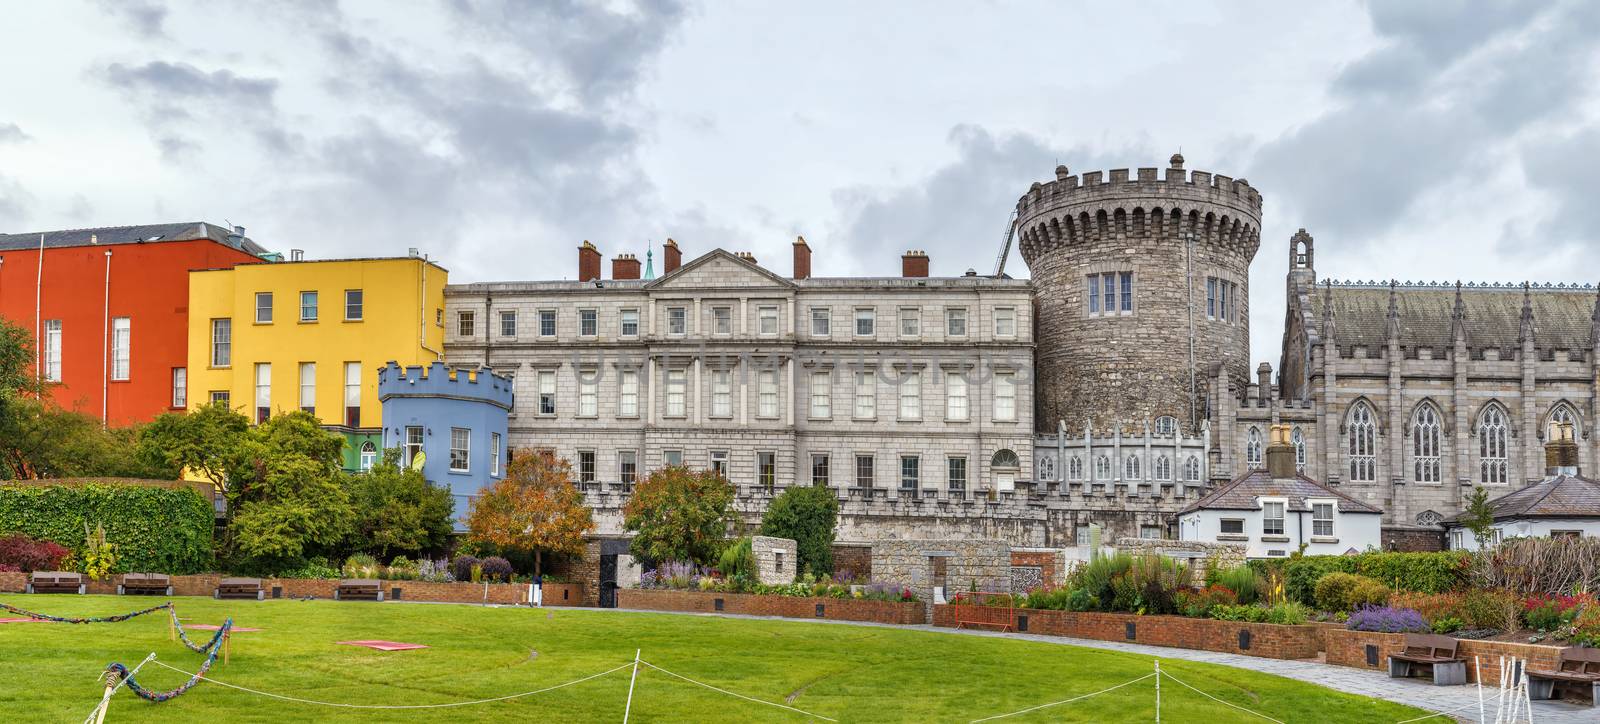 Panoramic view of Dublin castle from garden, Ireland